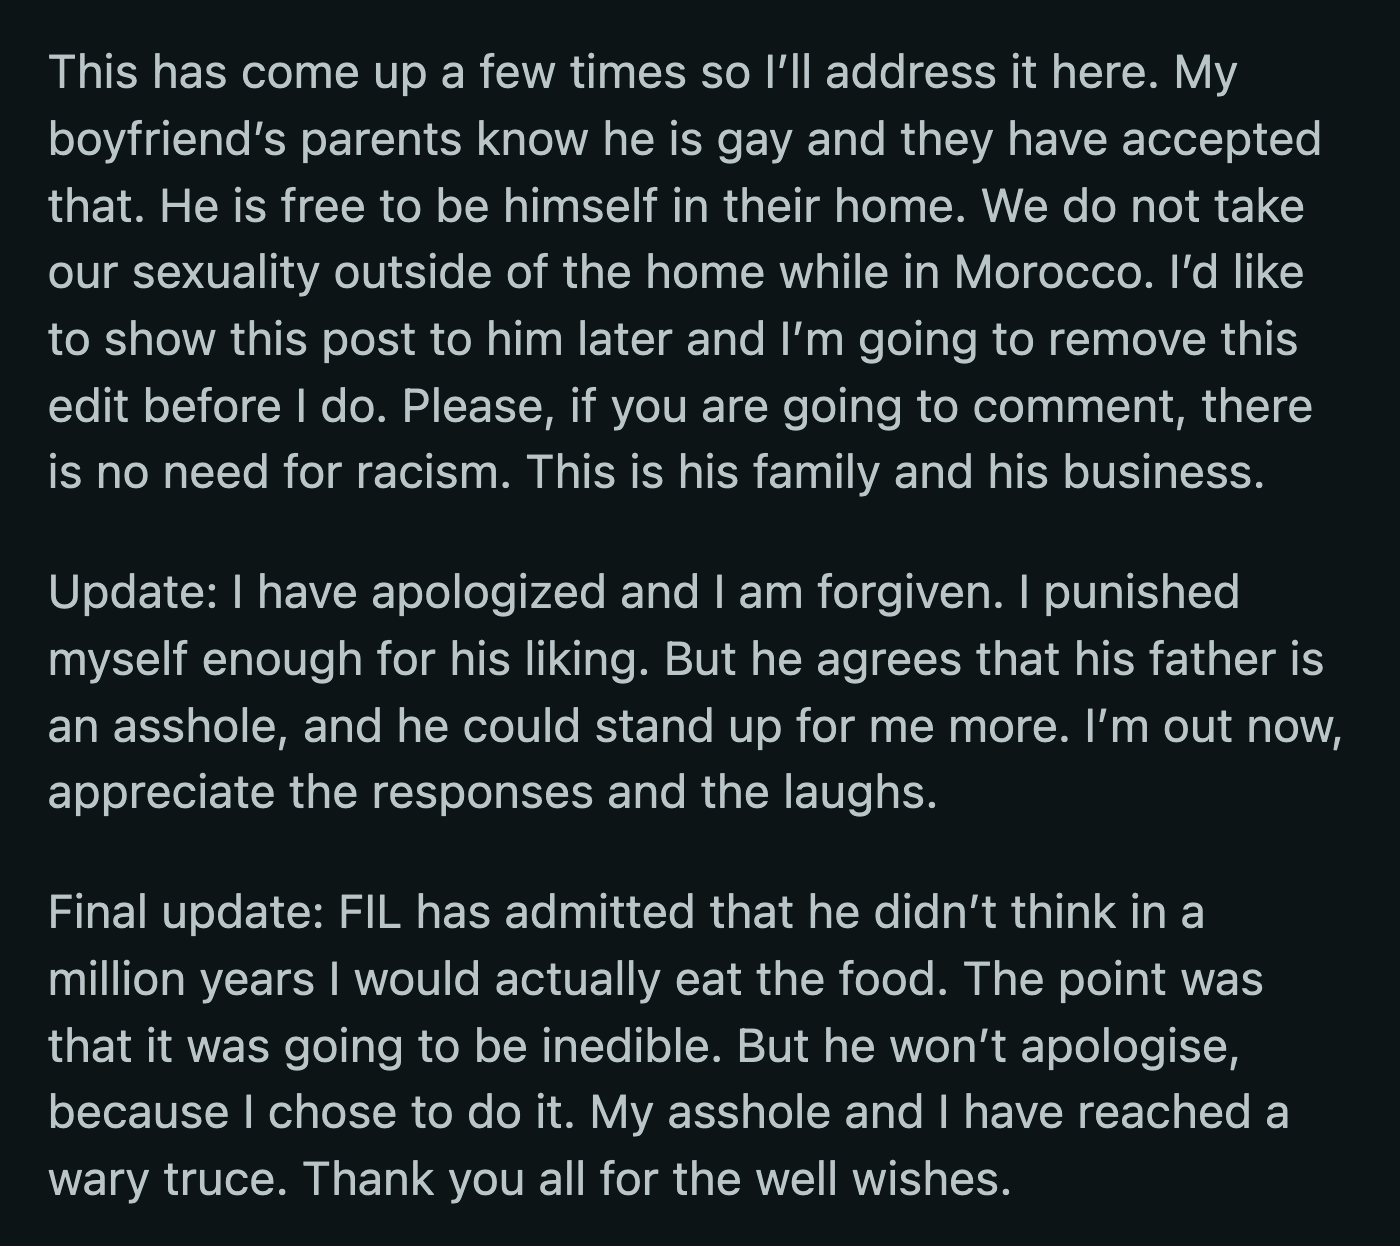 He also said his boyfriend's parents weren't homophobic, they just didn't like him for their son. His father-in-law also refused to apologize to OP. He said he did make the dish, but he didn't force OP to eat it.